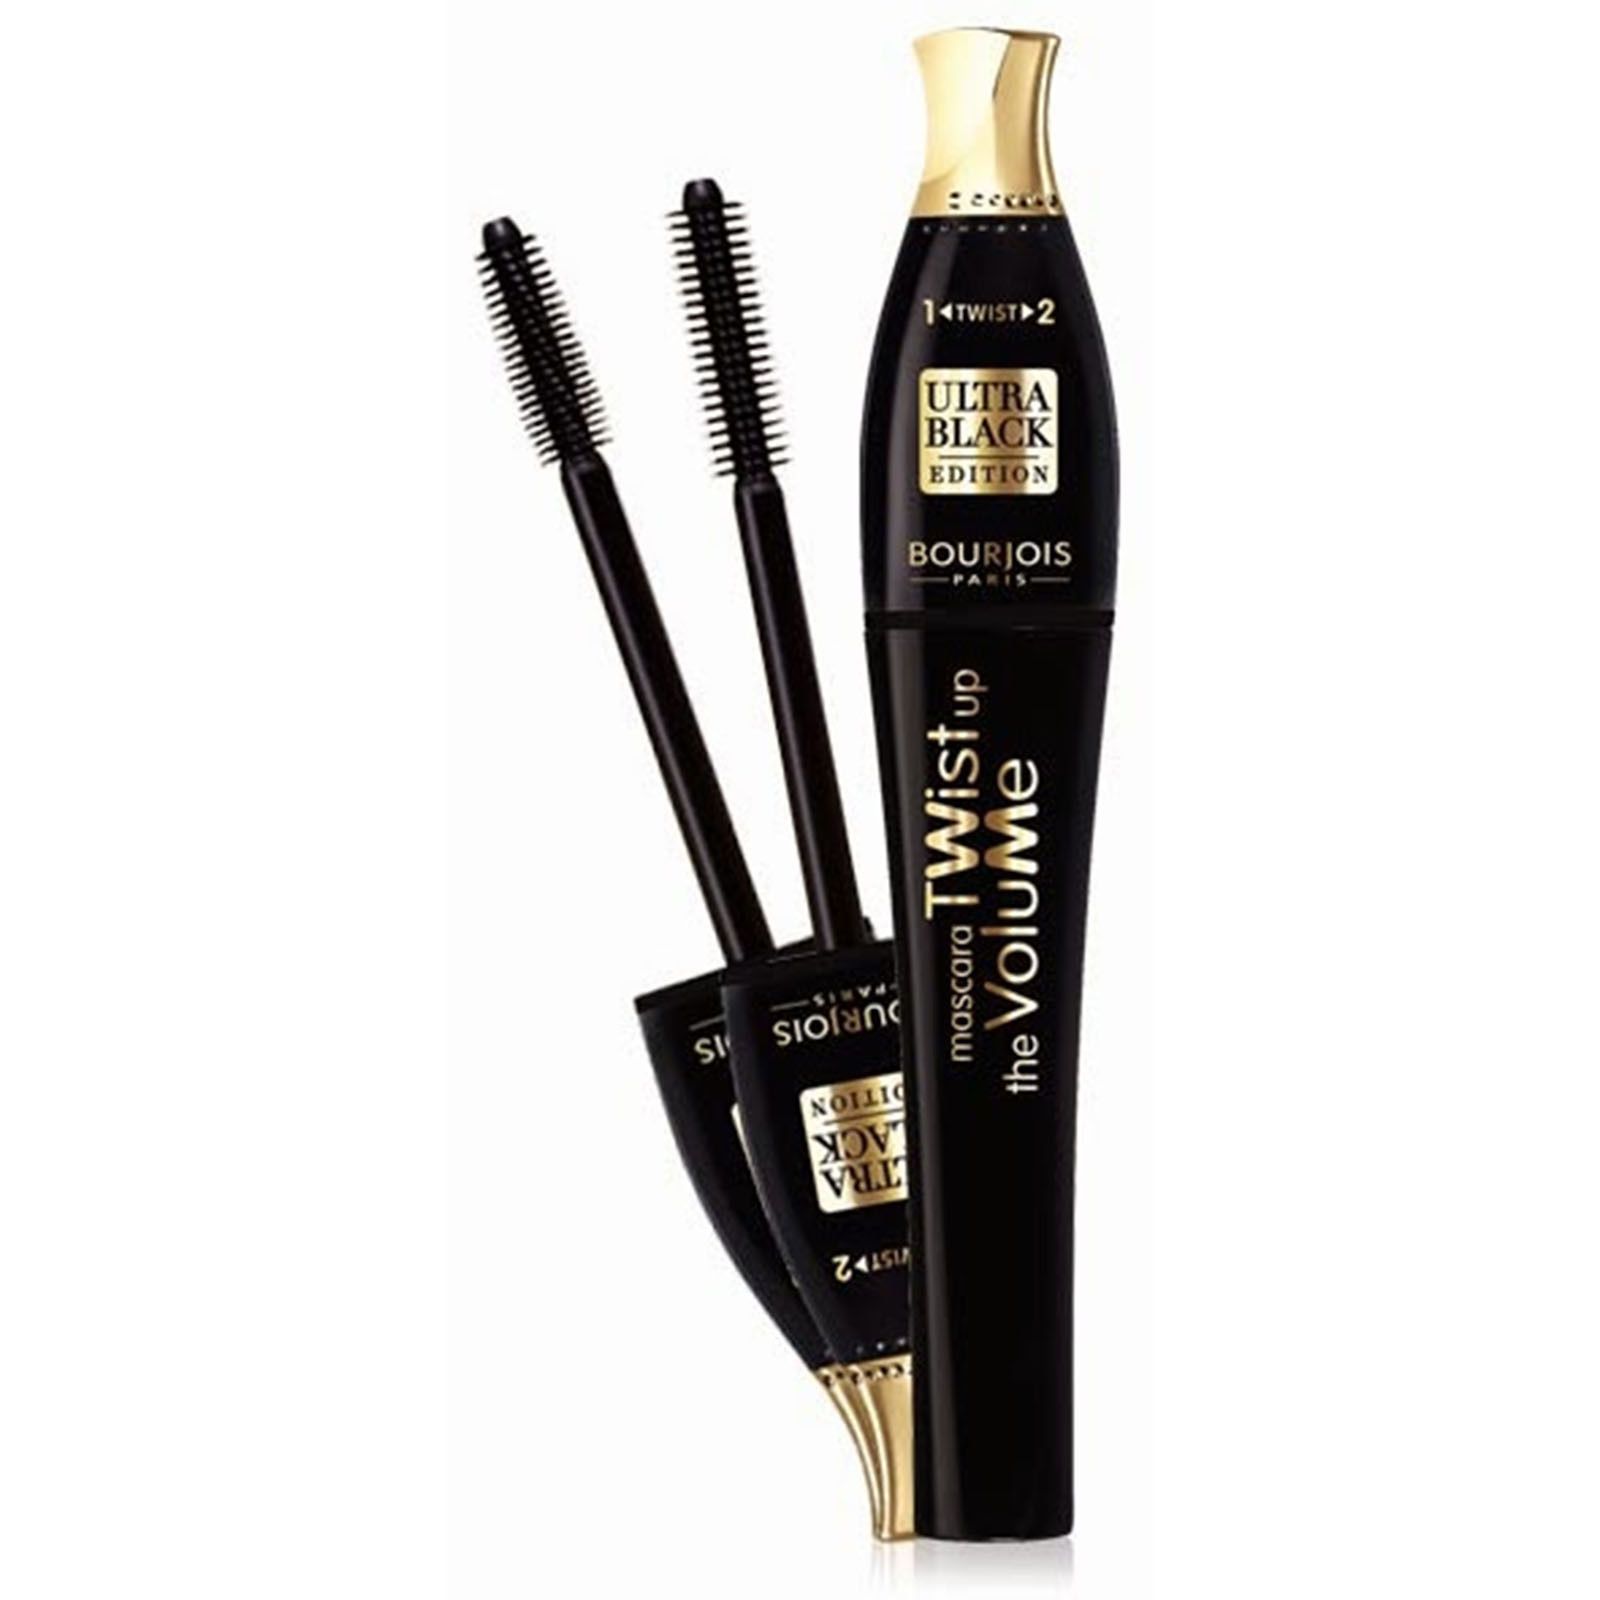 Bourjois Paris Twist Up The Volume Mascara 8ml - 52 Ultra Black Edition. Transformable brush with 2 results: Defined length and oversized volume. Use position 1 to lengthen and separate lashes and then use position 2 to volumise and intensify lashes. Bourjois tip: Apply an extra coat of mascara to the outer corners of the top lashes for a wide-eyed look